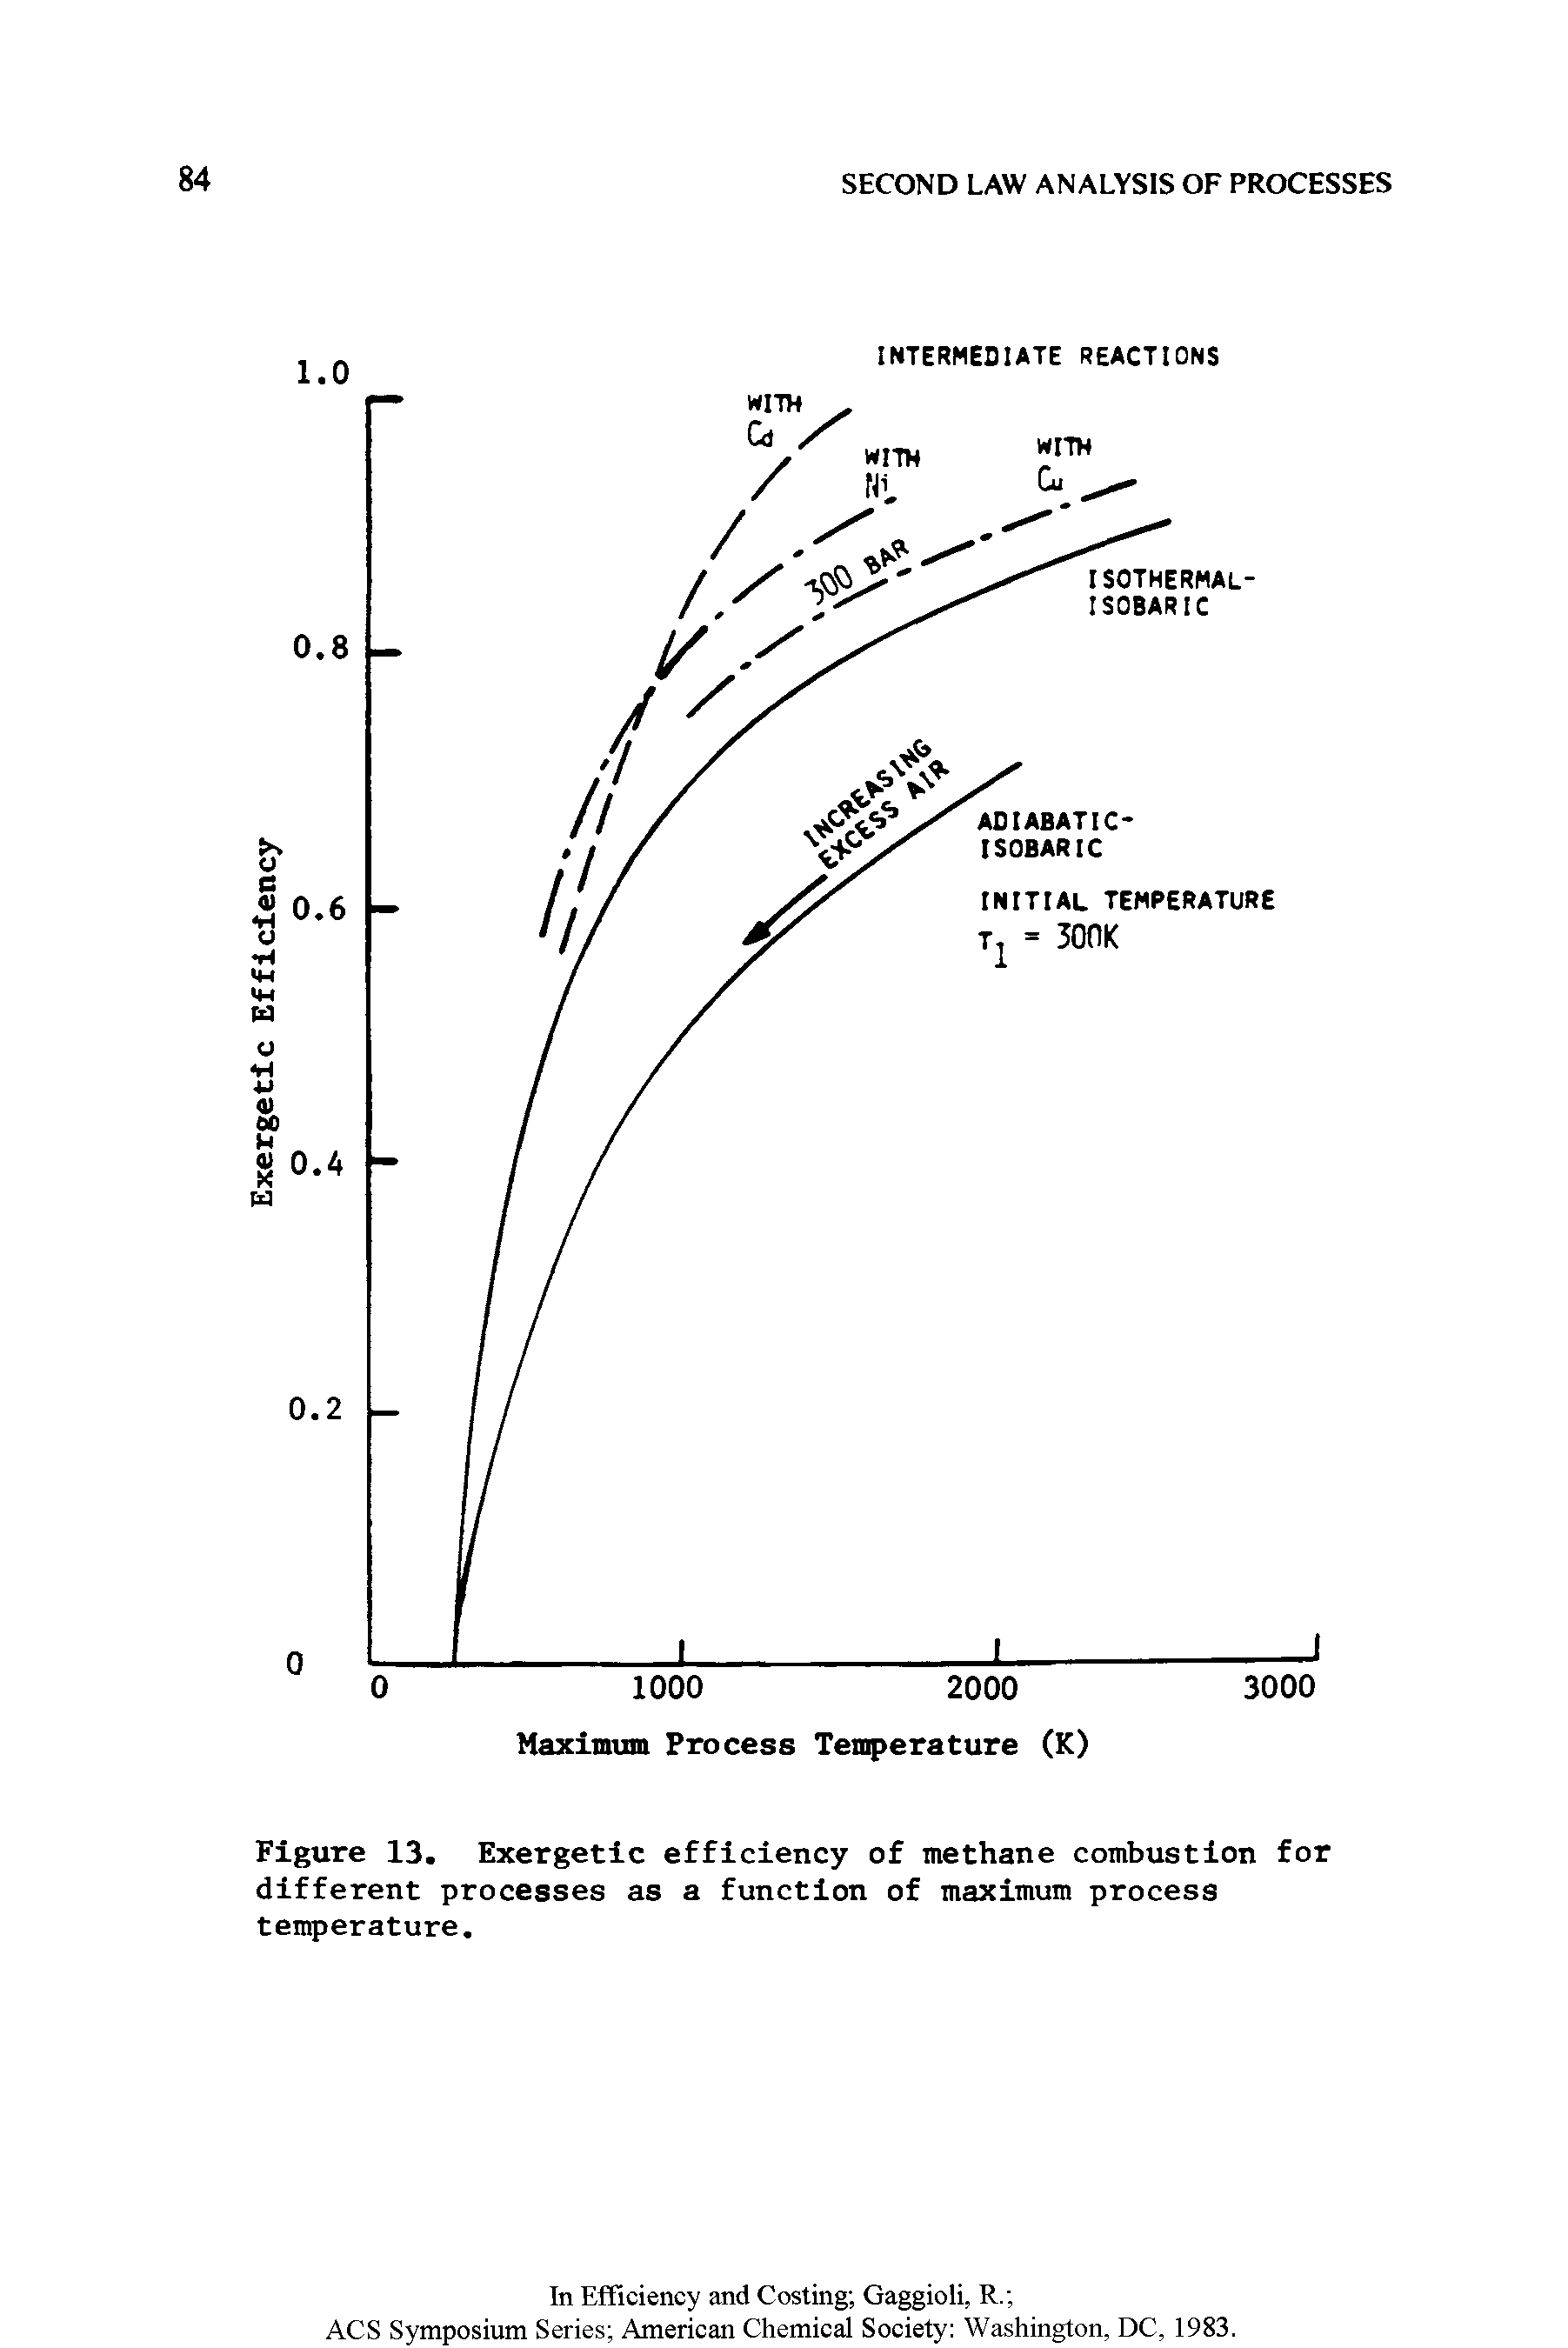 Figure 13. Exergetic efficiency of methane combustion for different processes as a function of maximum process temperature.